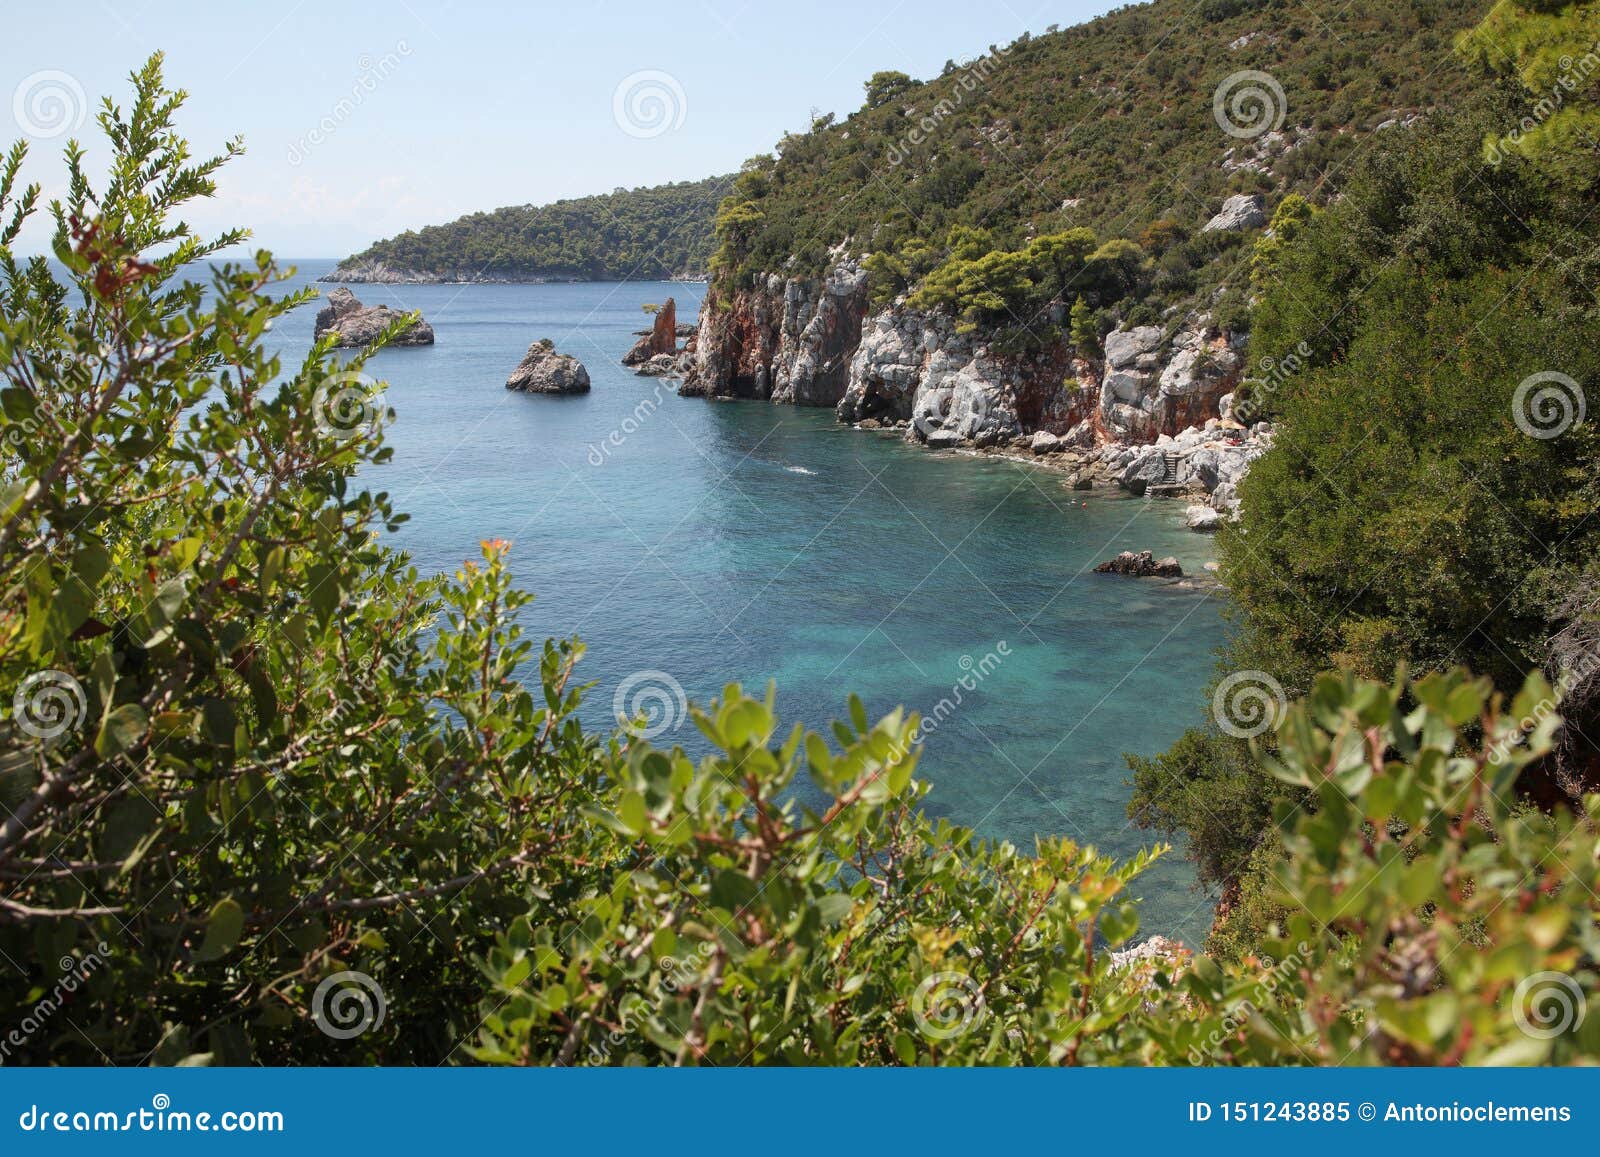 Mediterranean Azure Coves and Beautiful Bays Stock Image - Image of ...